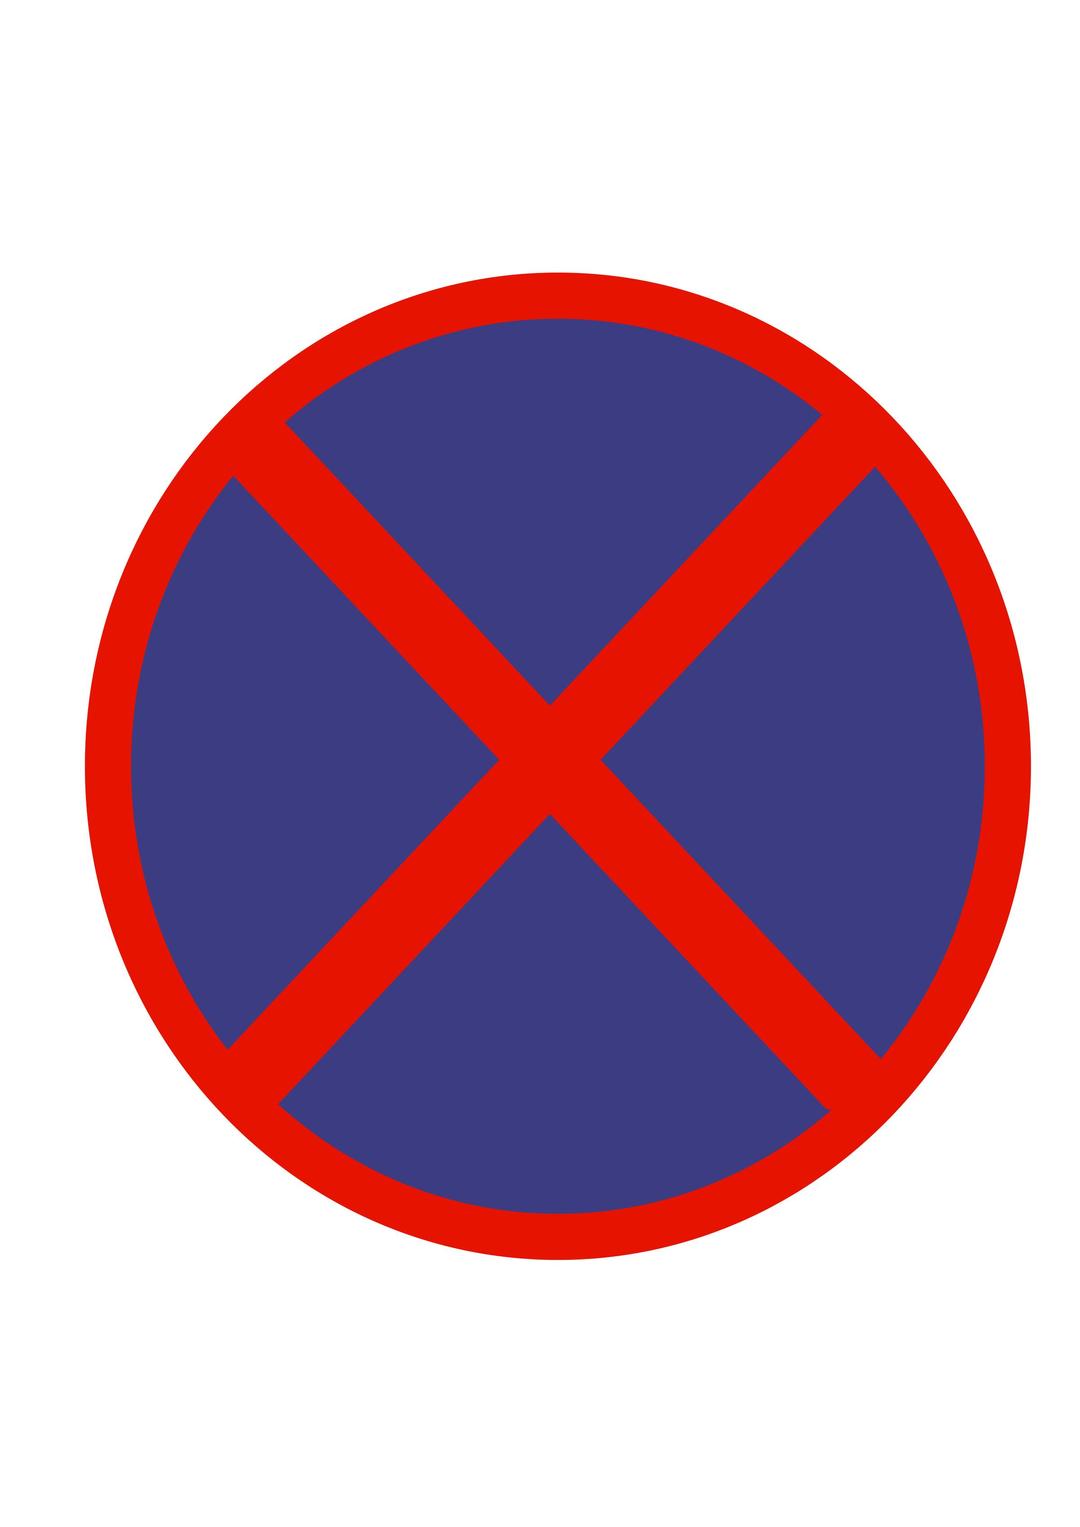 Indian road sign - No stopping png transparent